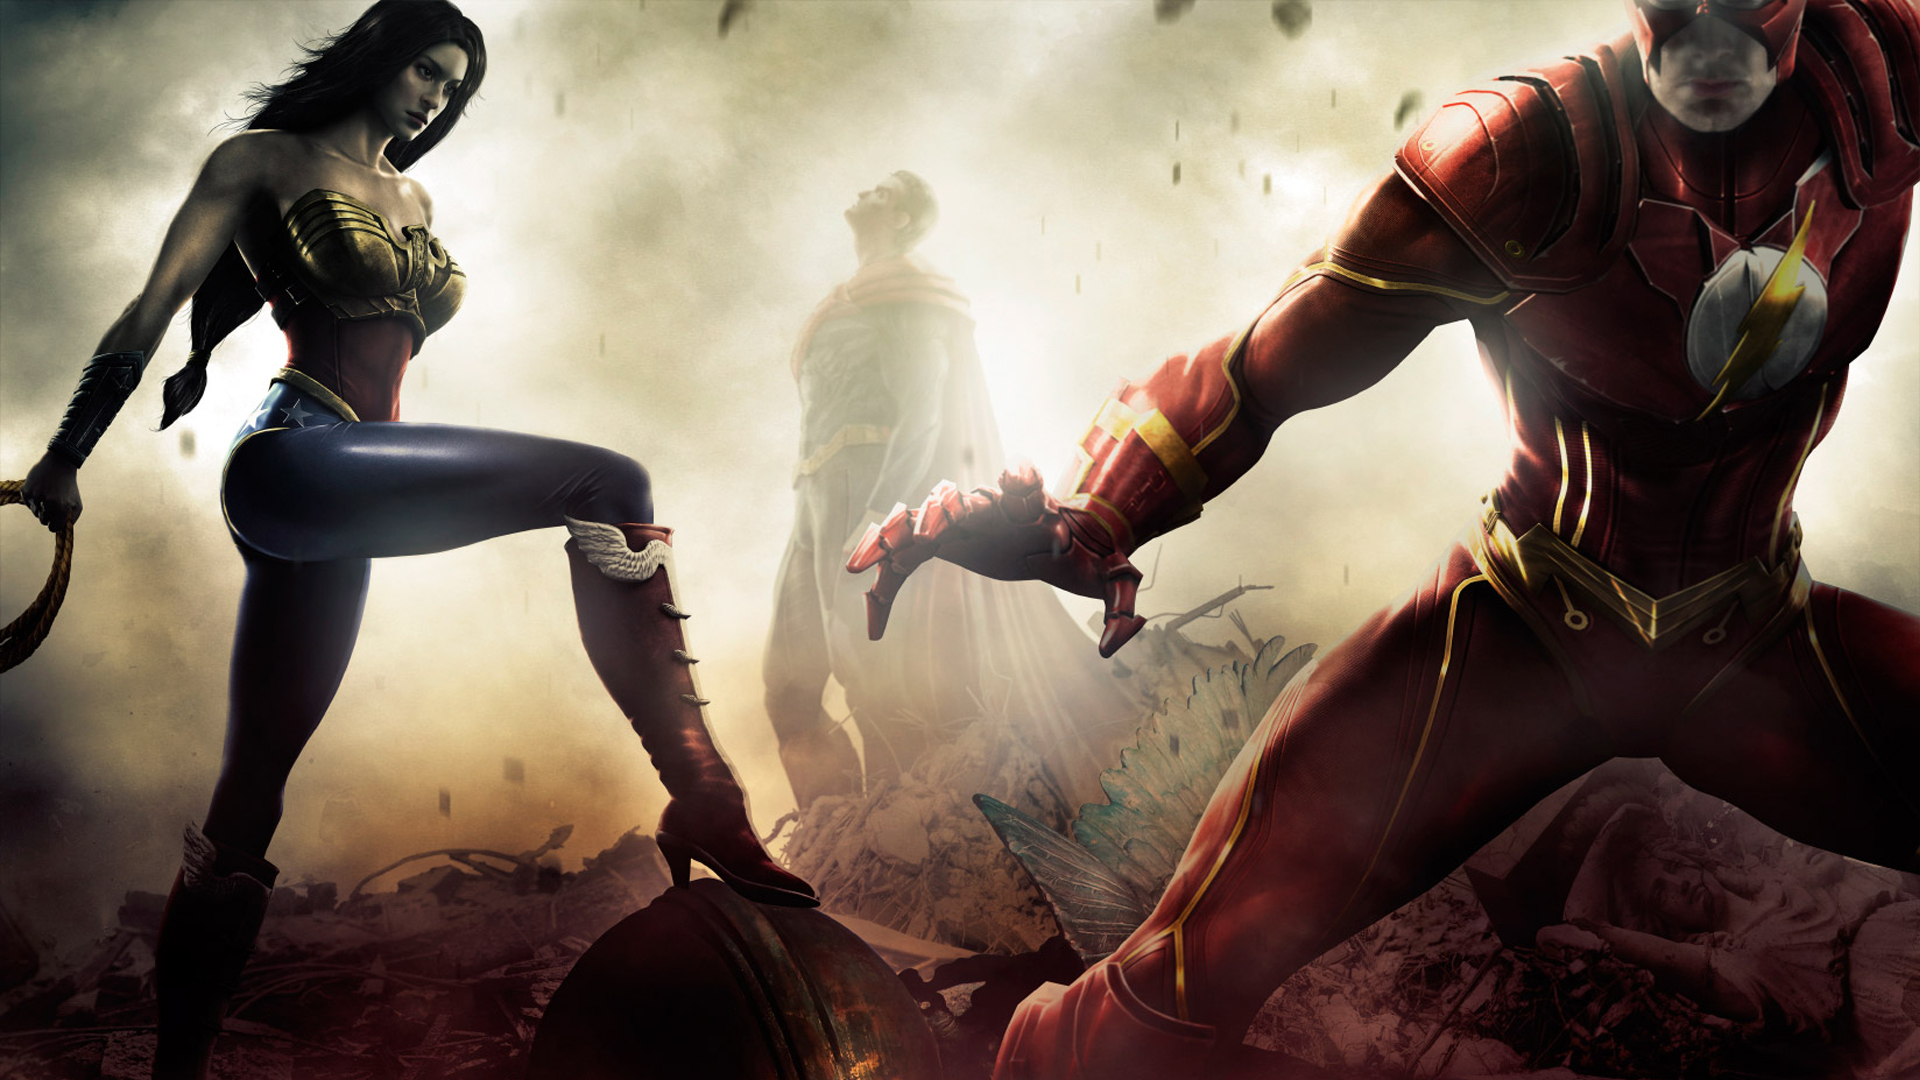 injustice: gods among us, video game, injustice